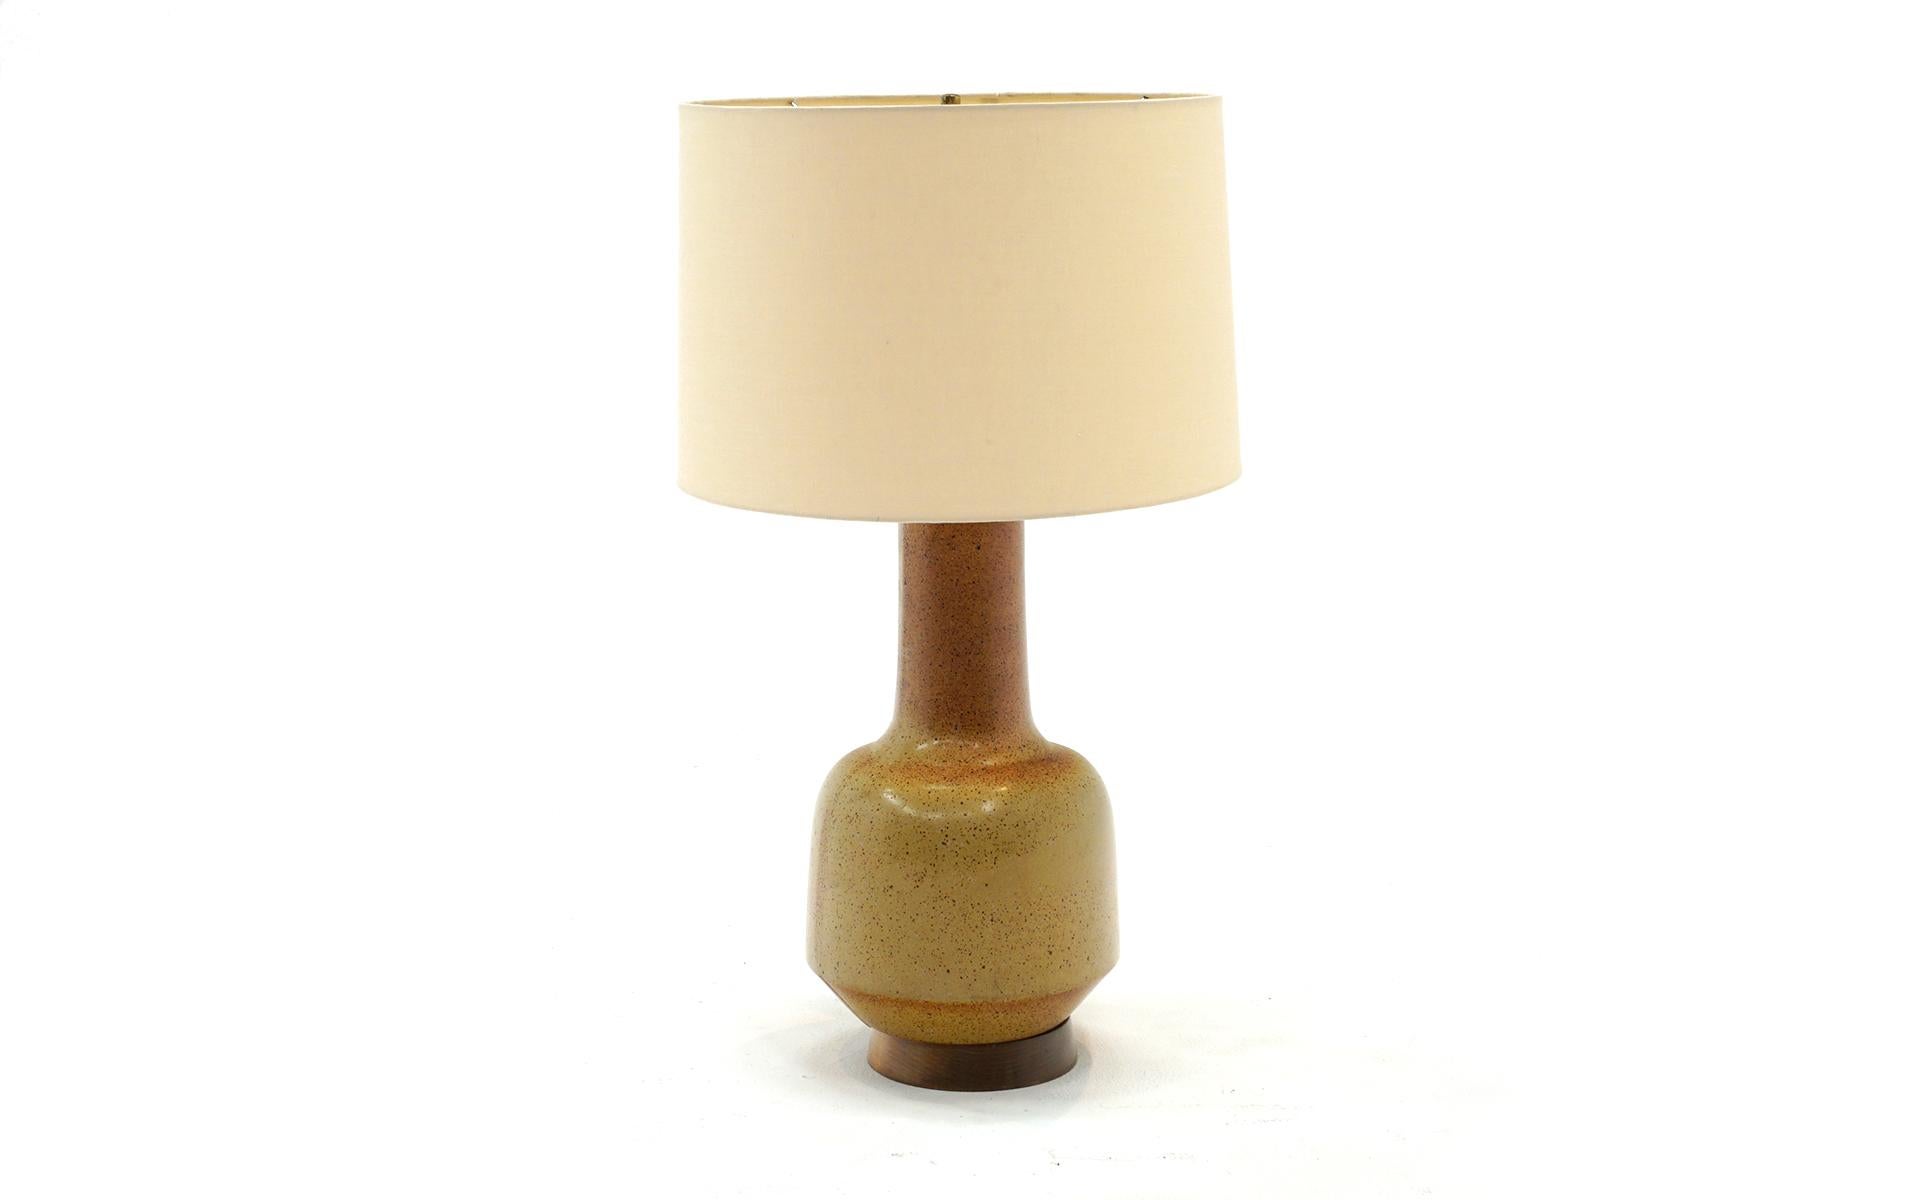 Two tone ceramic table lamp with the original shade much in the style of Martz lamps for Marshall Studios. Maybe an unsigned example? We don't know but appears just as well made and has a beautiful two tone gradient finish. No chips, cracks or